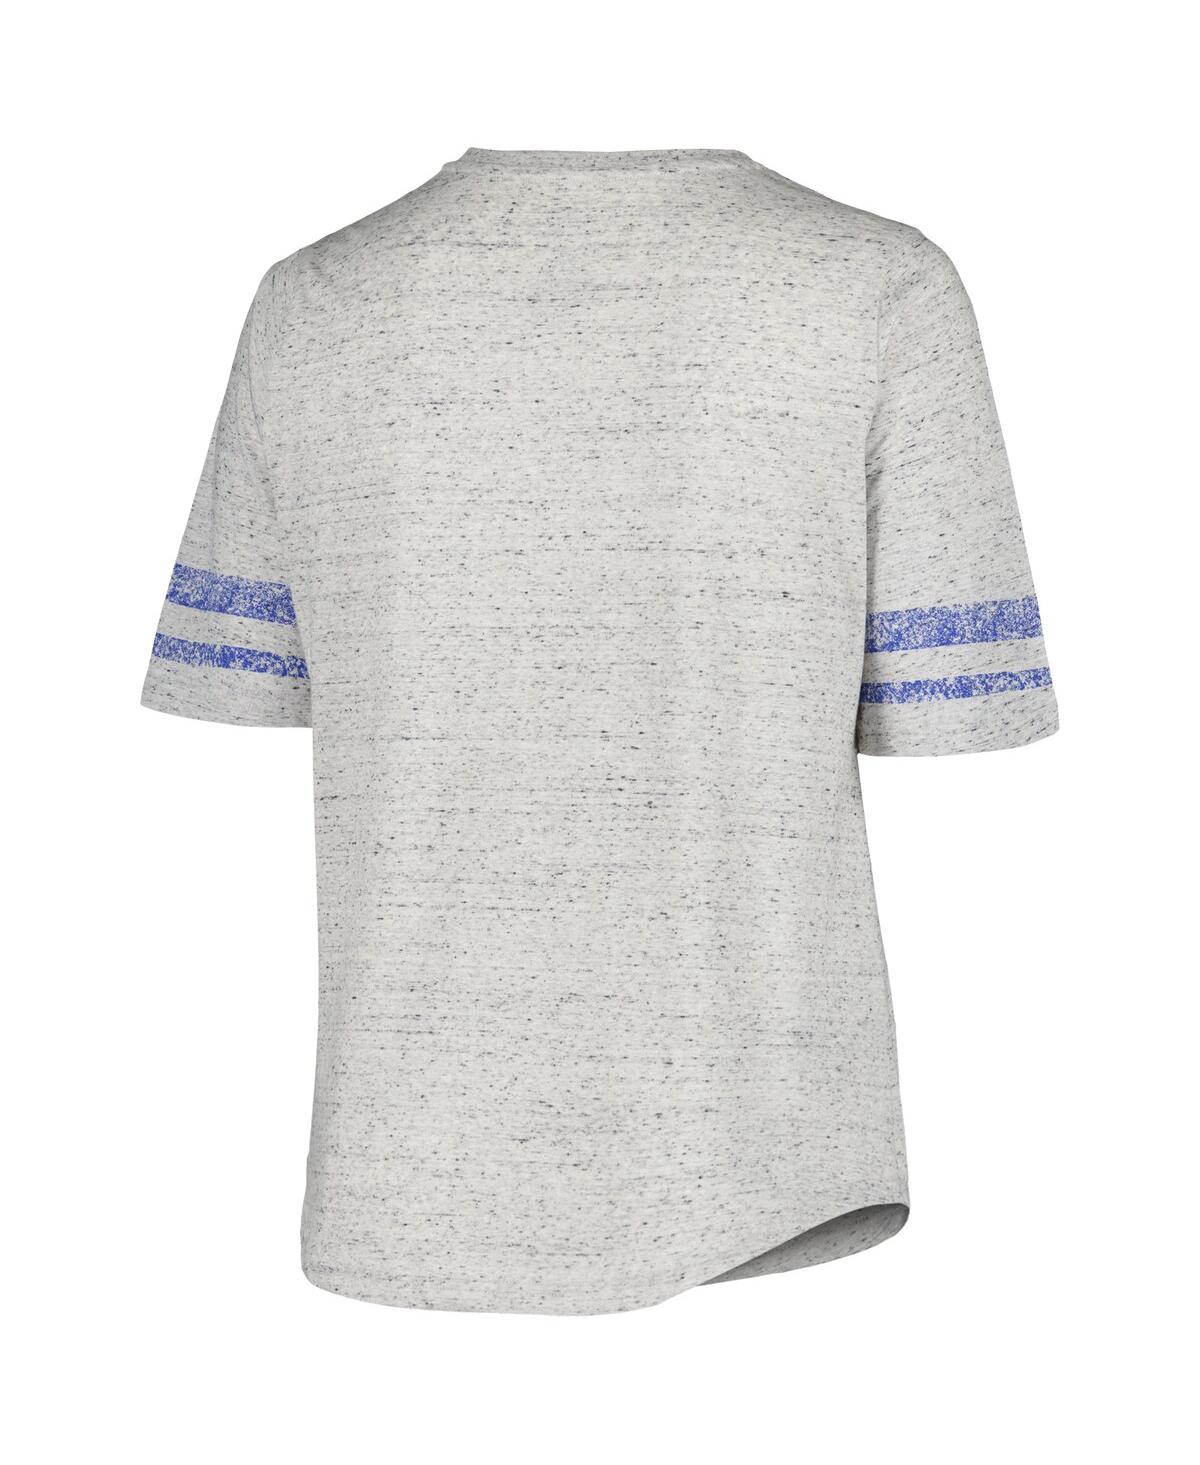 Shop Profile Women's  Heather Gray Distressed Kentucky Wildcats Plus Size Striped Lace-up T-shirt